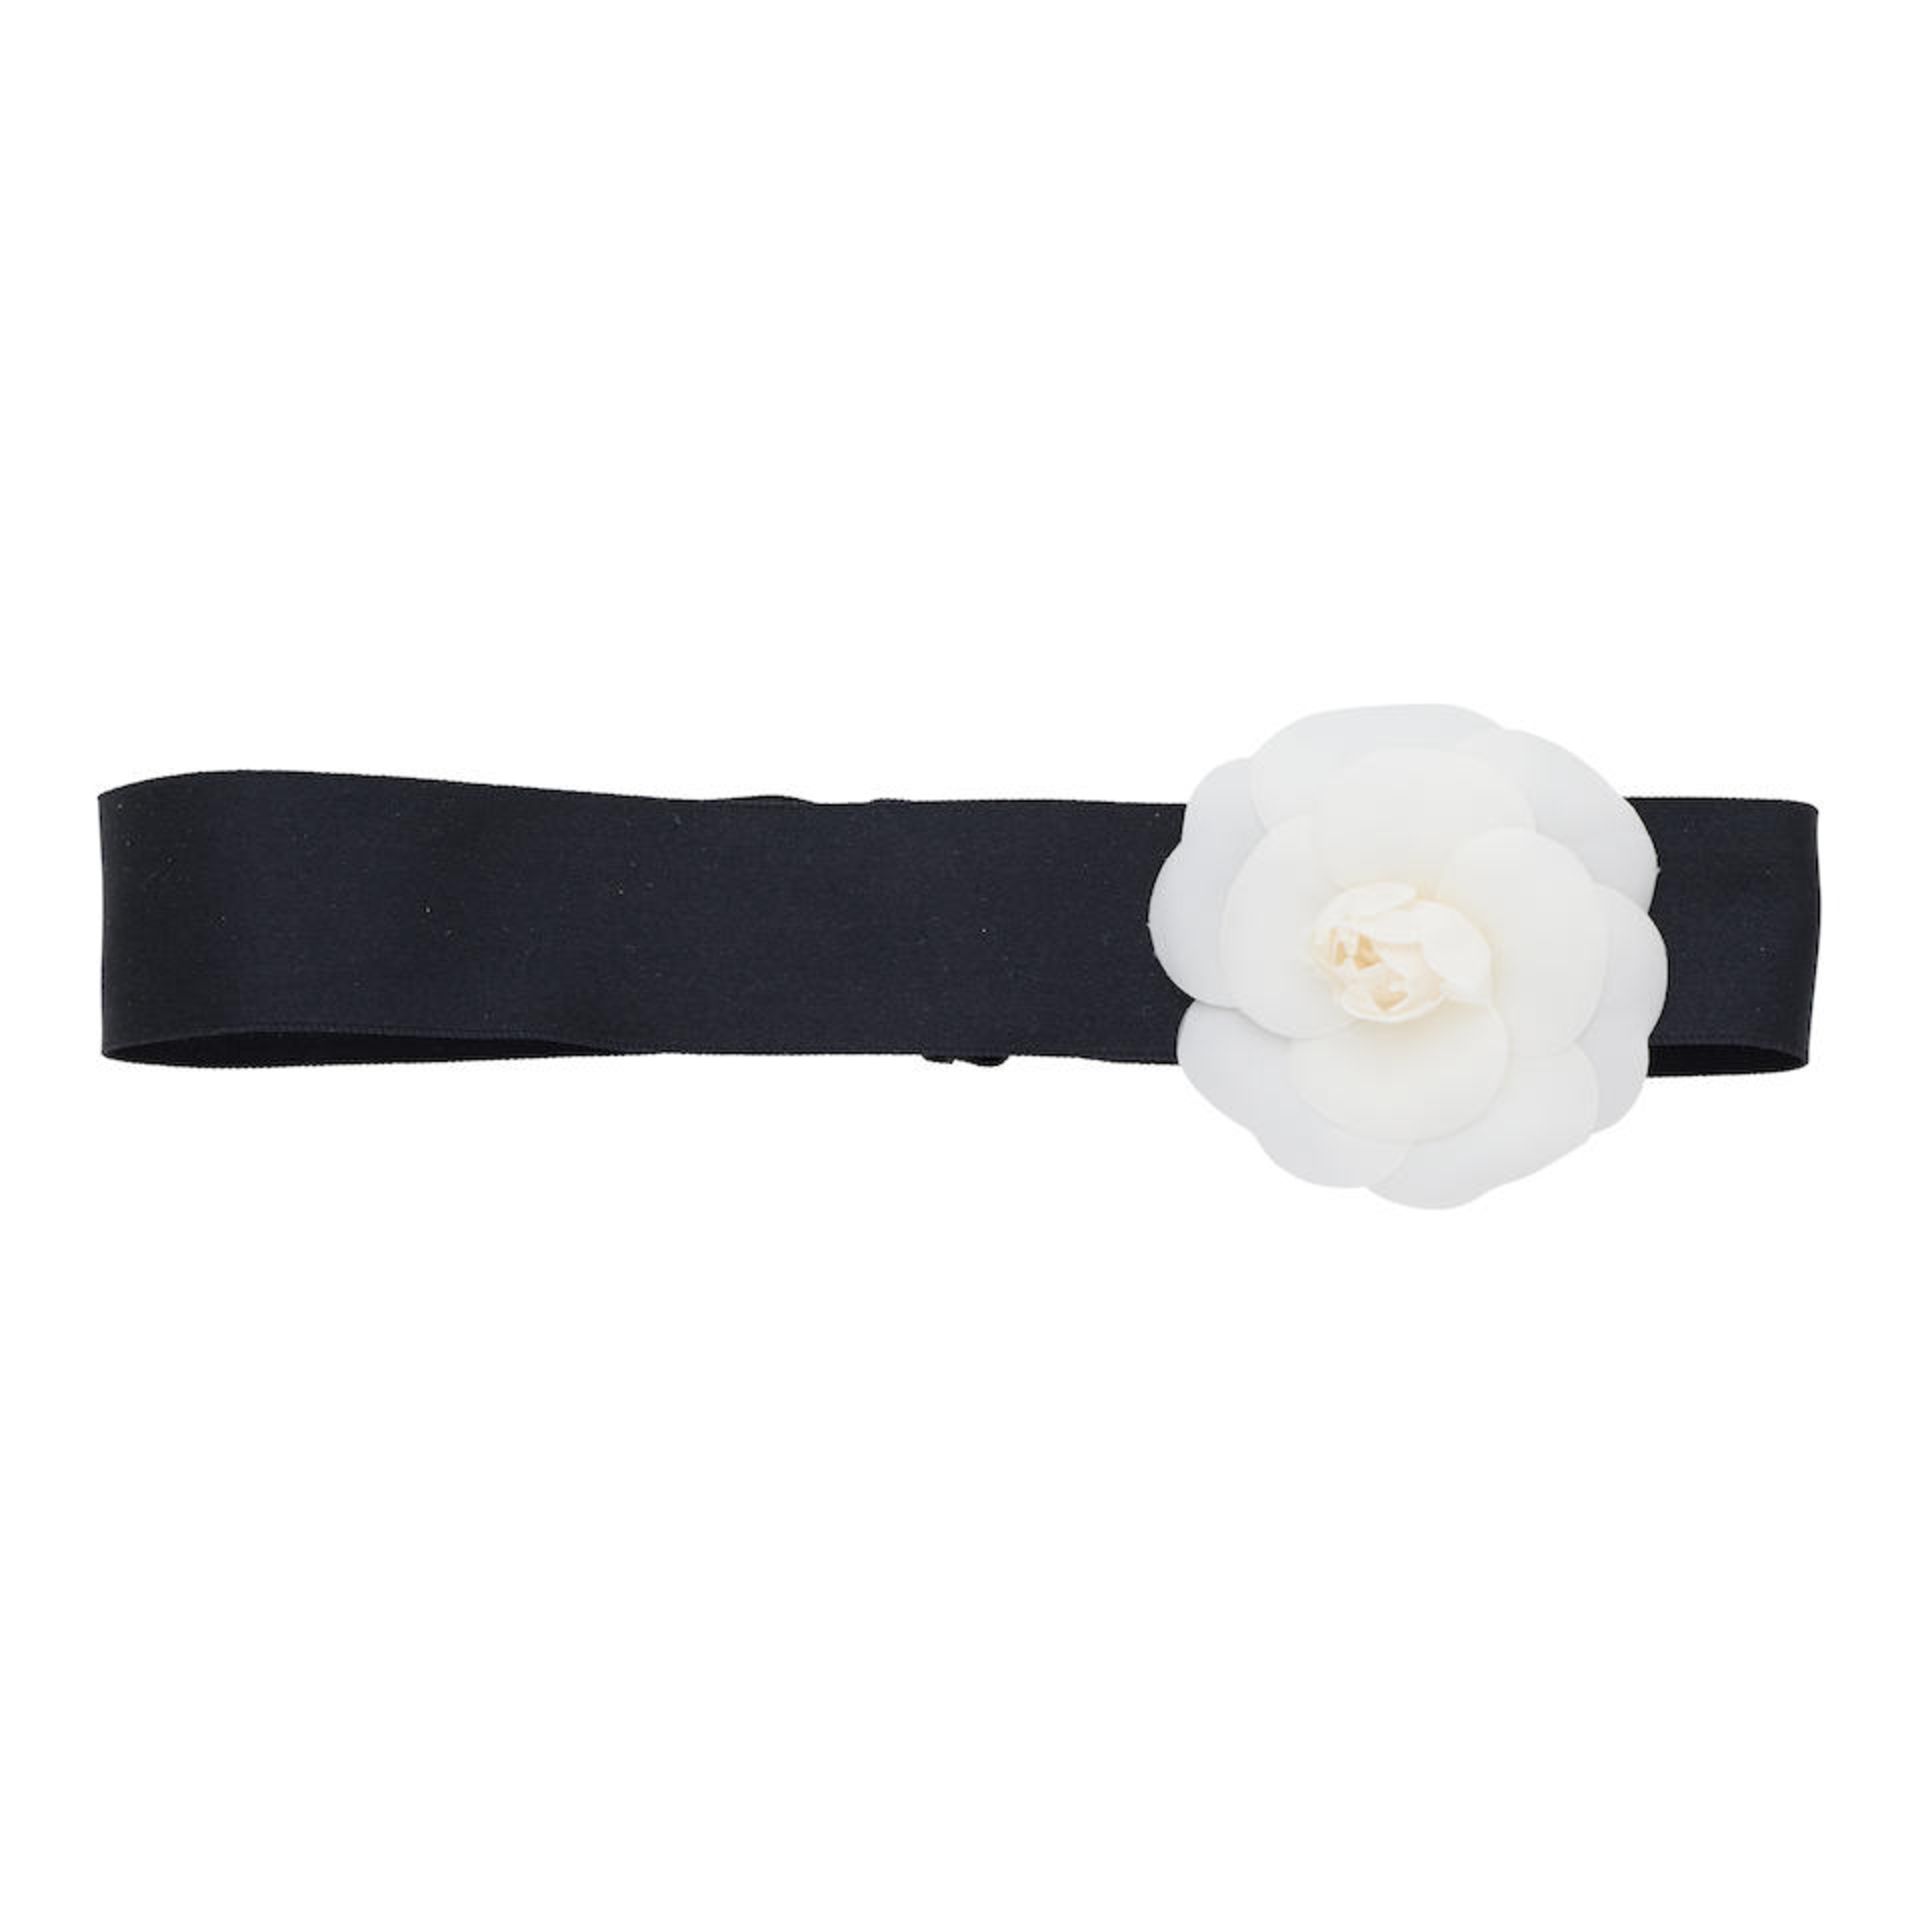 Karl Lagerfeld for Chanel: a Black and White Camellia Hair Band 1990s (includes box) - Bild 2 aus 2